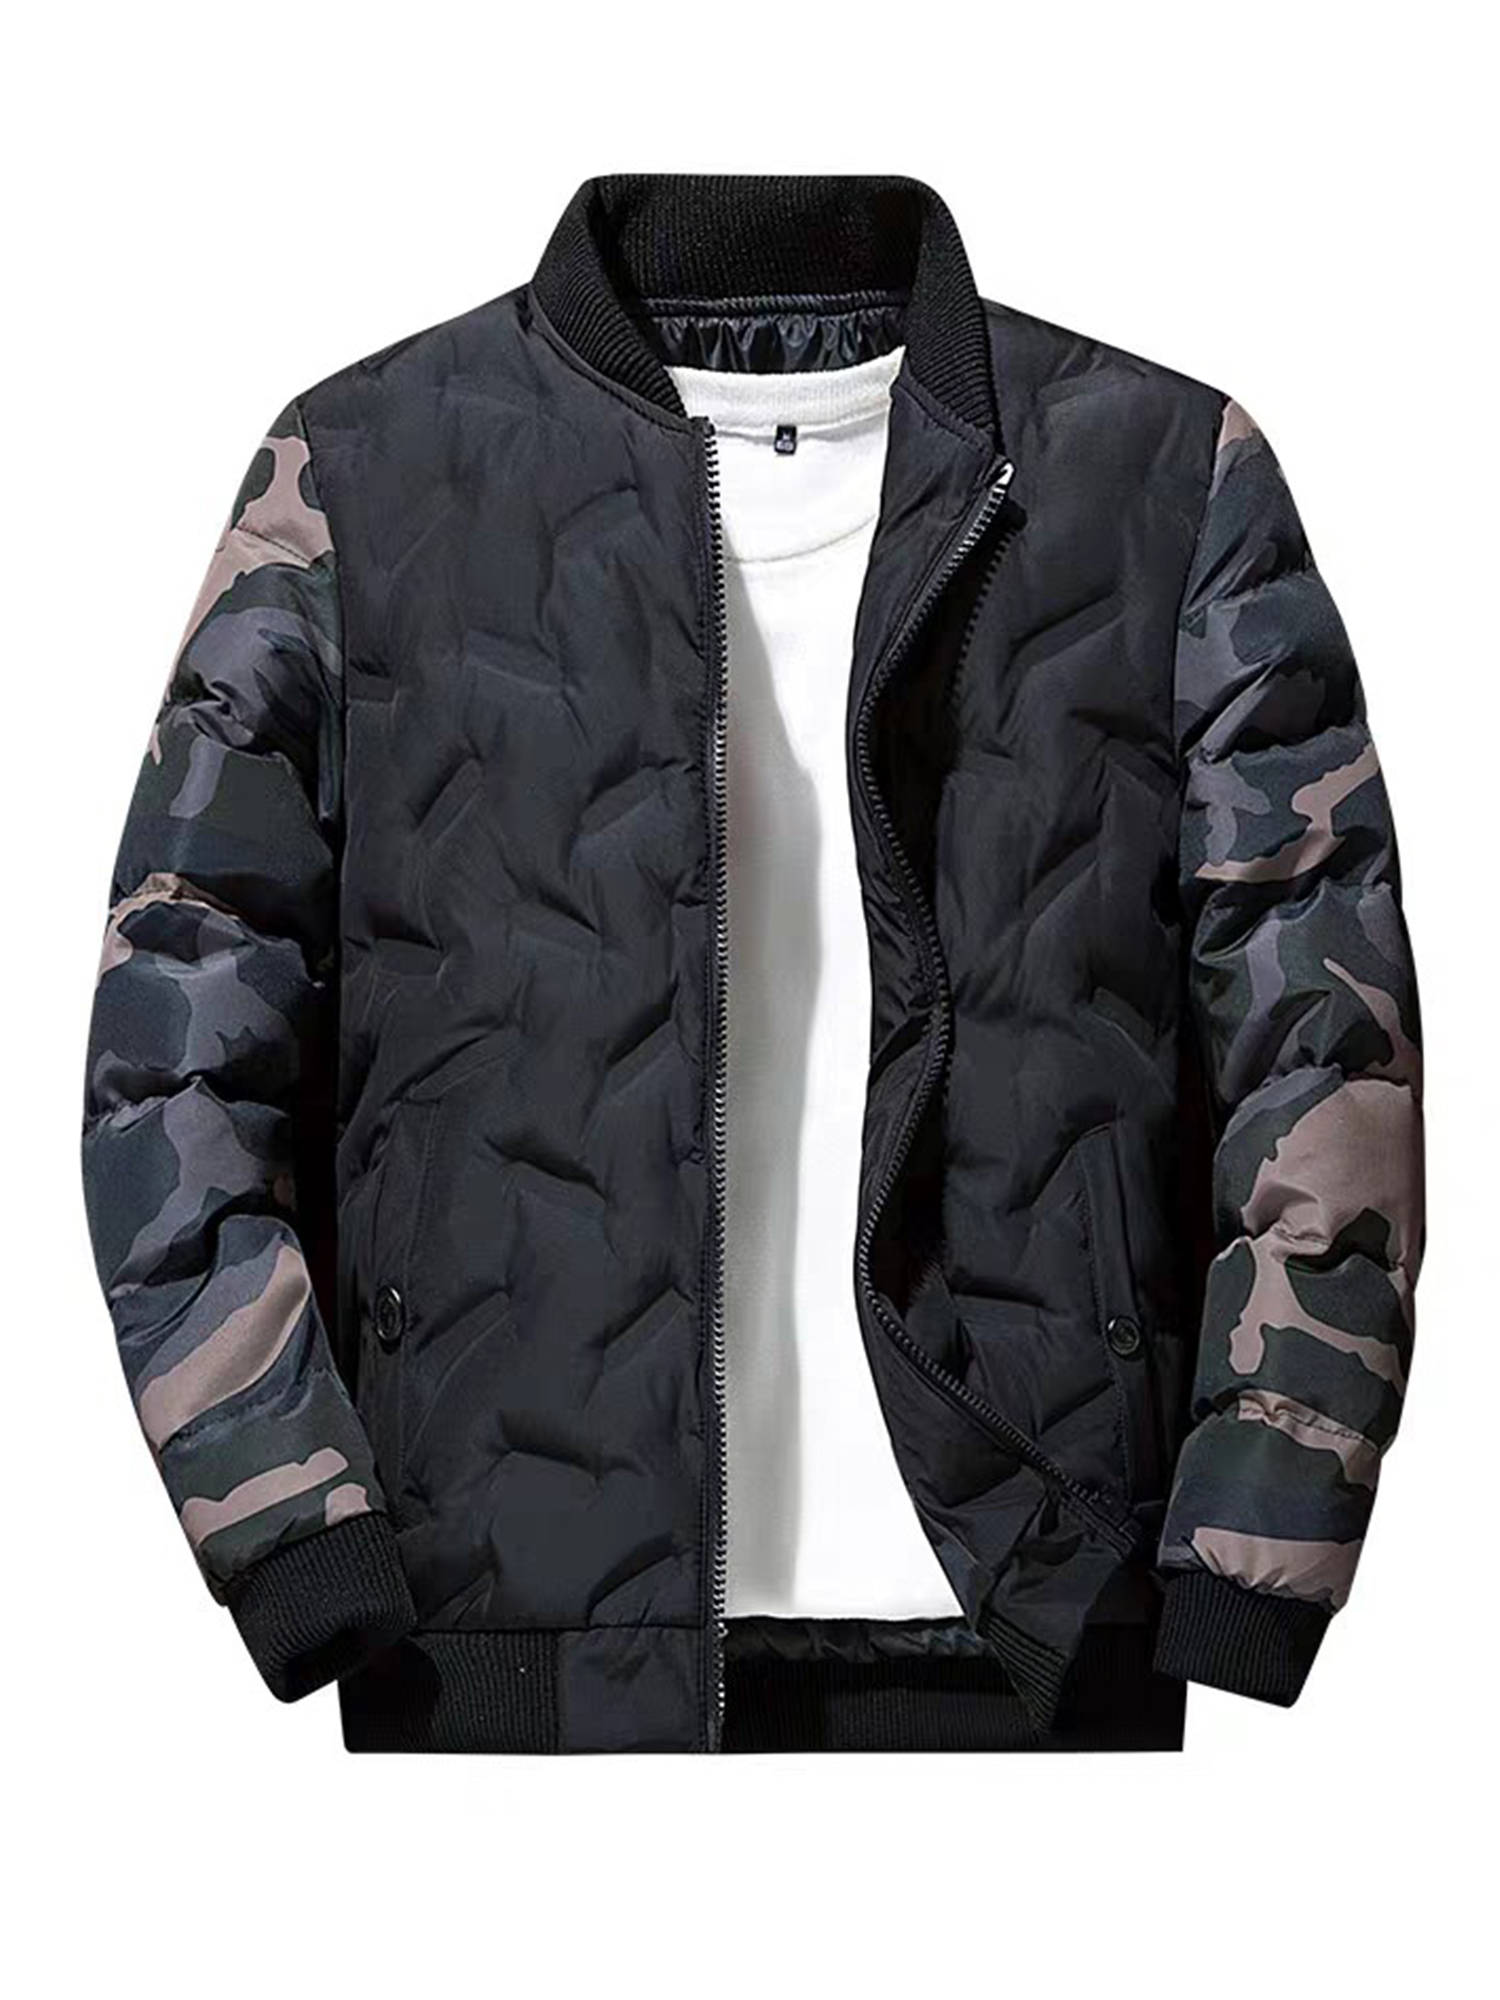 UKAP Mens Full Zip Up Insulated Bomber Jacket Warm Varsity Jacket with Camo Sleeves Stand Collar for Fall Winter - image 4 of 6